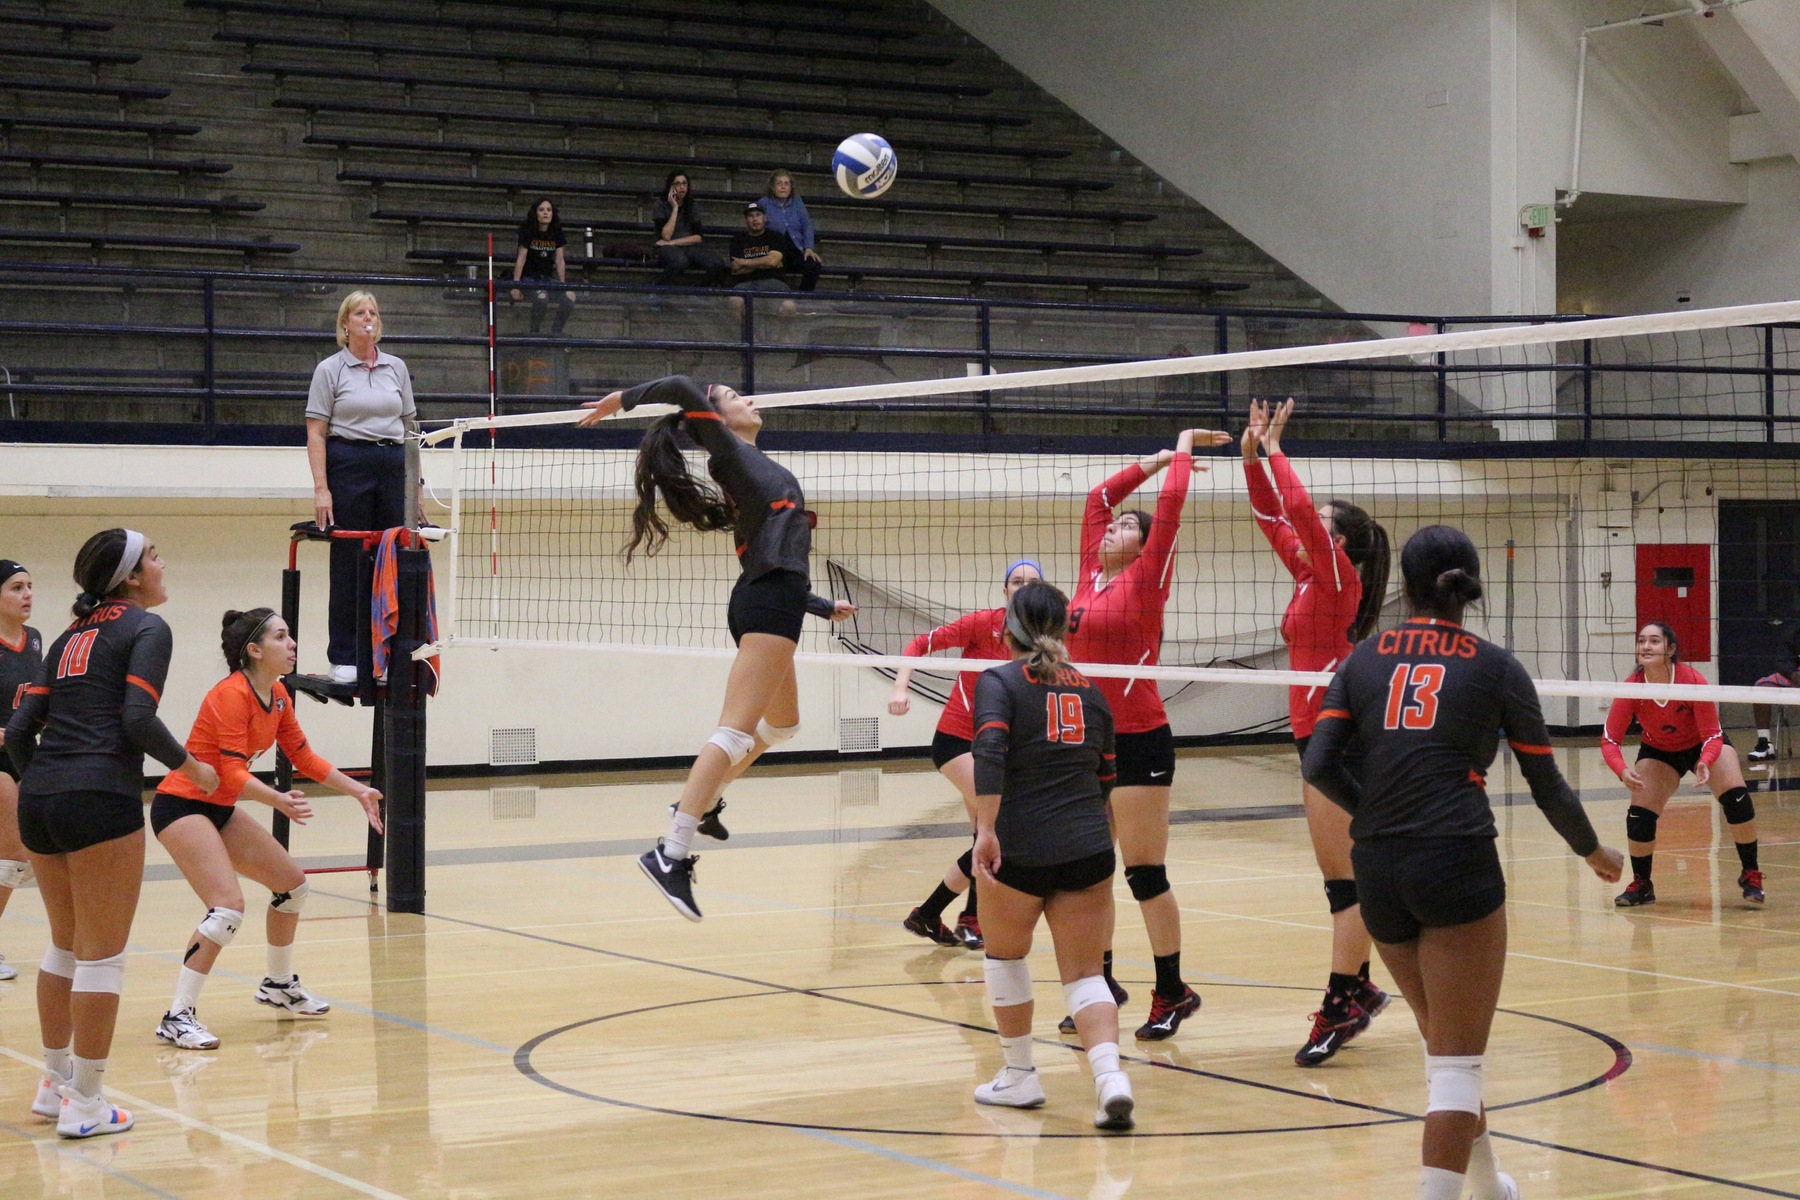 Middle Blocker Iris Bernal launches for a quick set from Julianna Aceituno. Image: Treyvon Watts-Hale